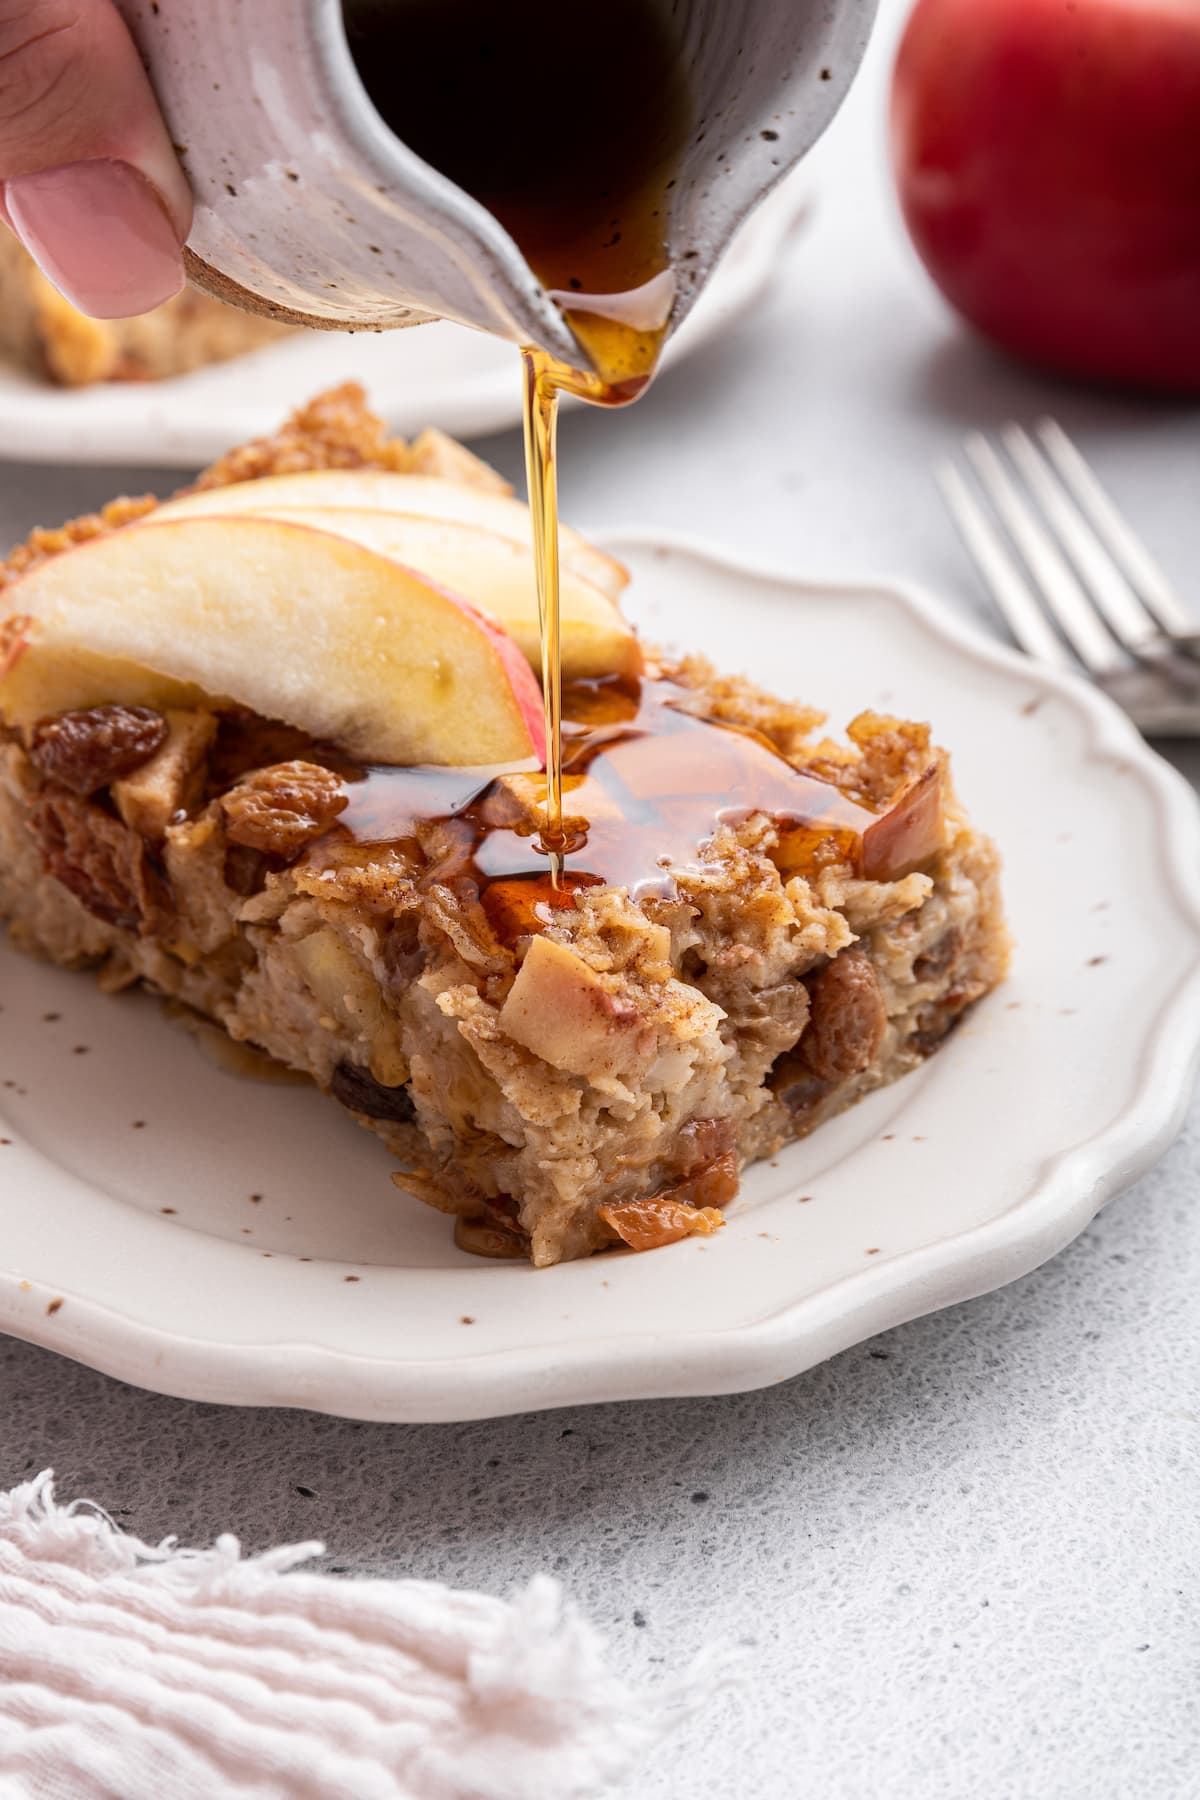 Maple syrup being poured on a piece of apple cinnamon baked oatmeal on a small plate.